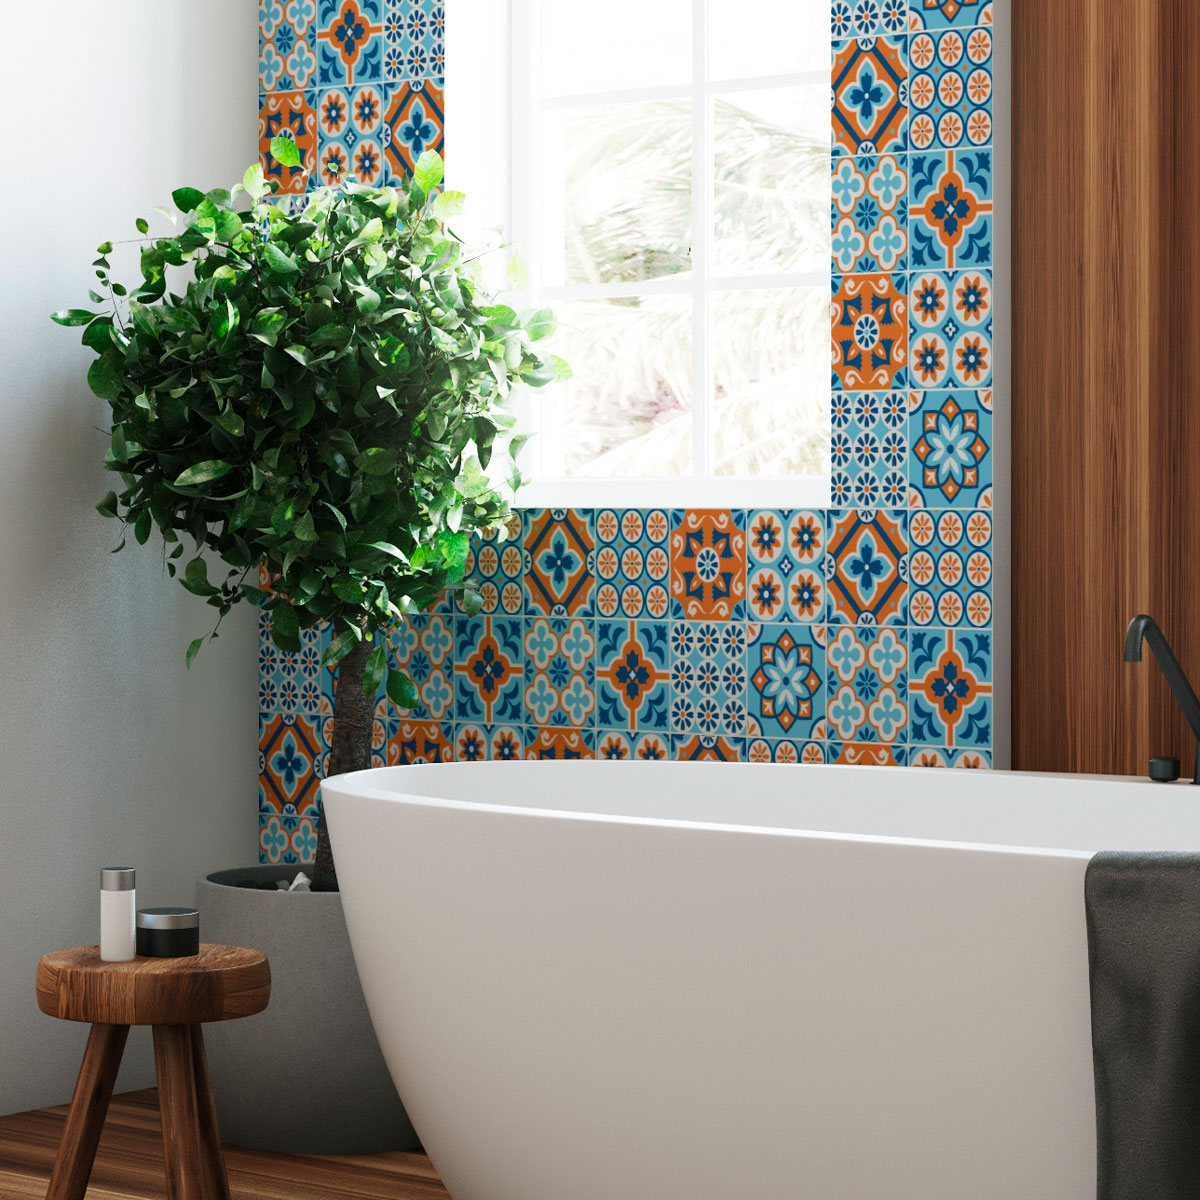 24 wall decal cement tiles azulejos dionito